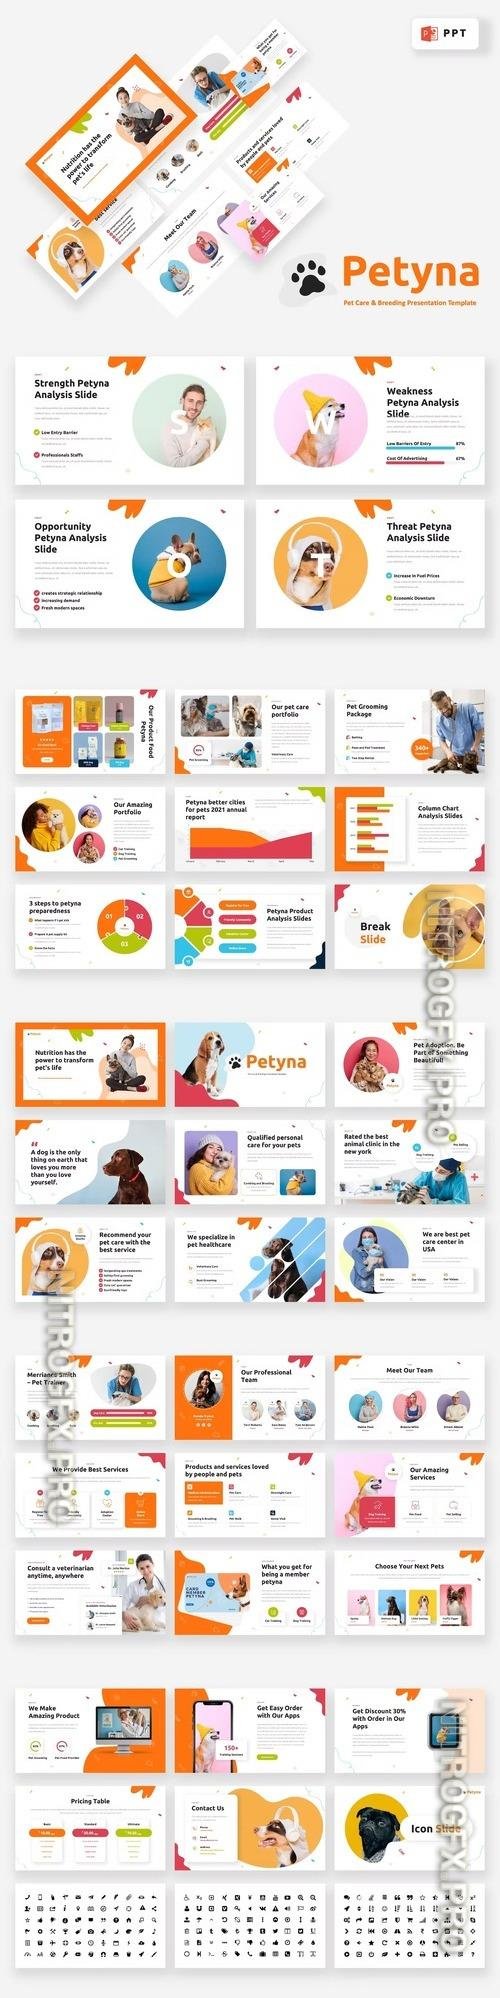 PETYNA - Pet Care & Breeding Powerpoint Template